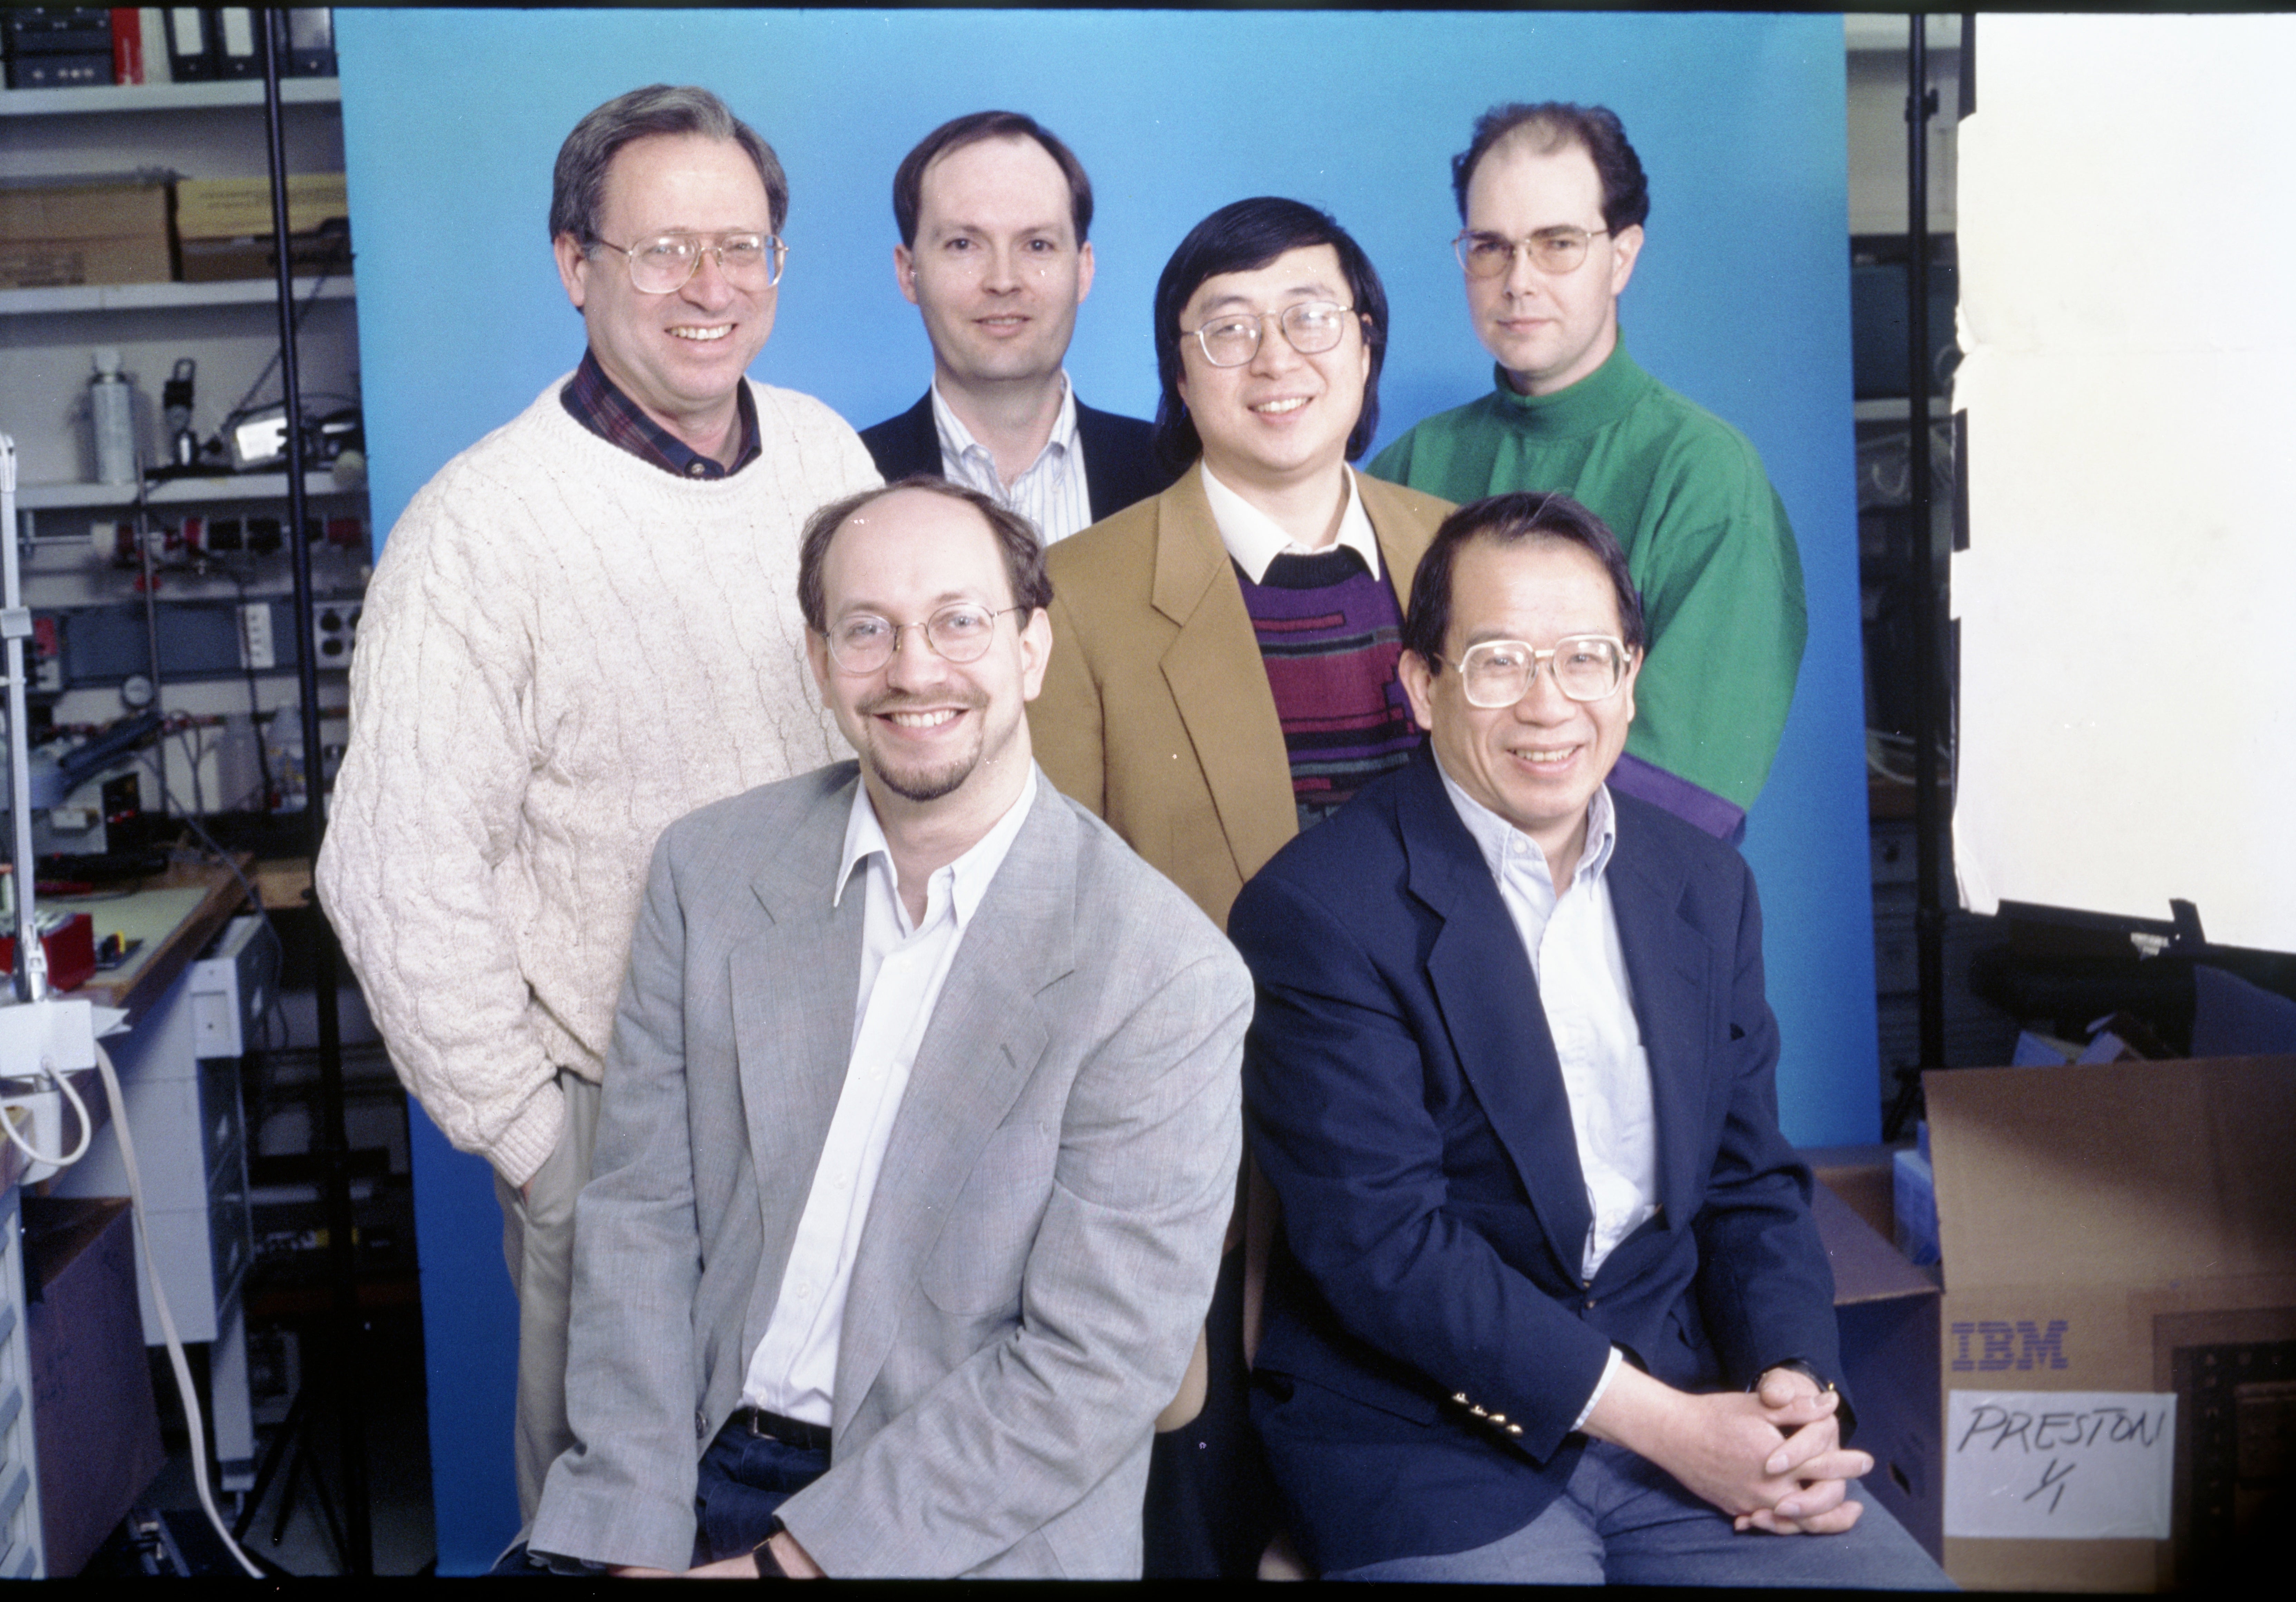 The Deep Blue team. Clockwise from the top left: Jerry Brody, Murray Campbell, Feng-hsiung Hsu, Joseph Hoane Jr., Chung-Jen Tan, and Joel Benjamin. (Photo: Courtesy of IBM)